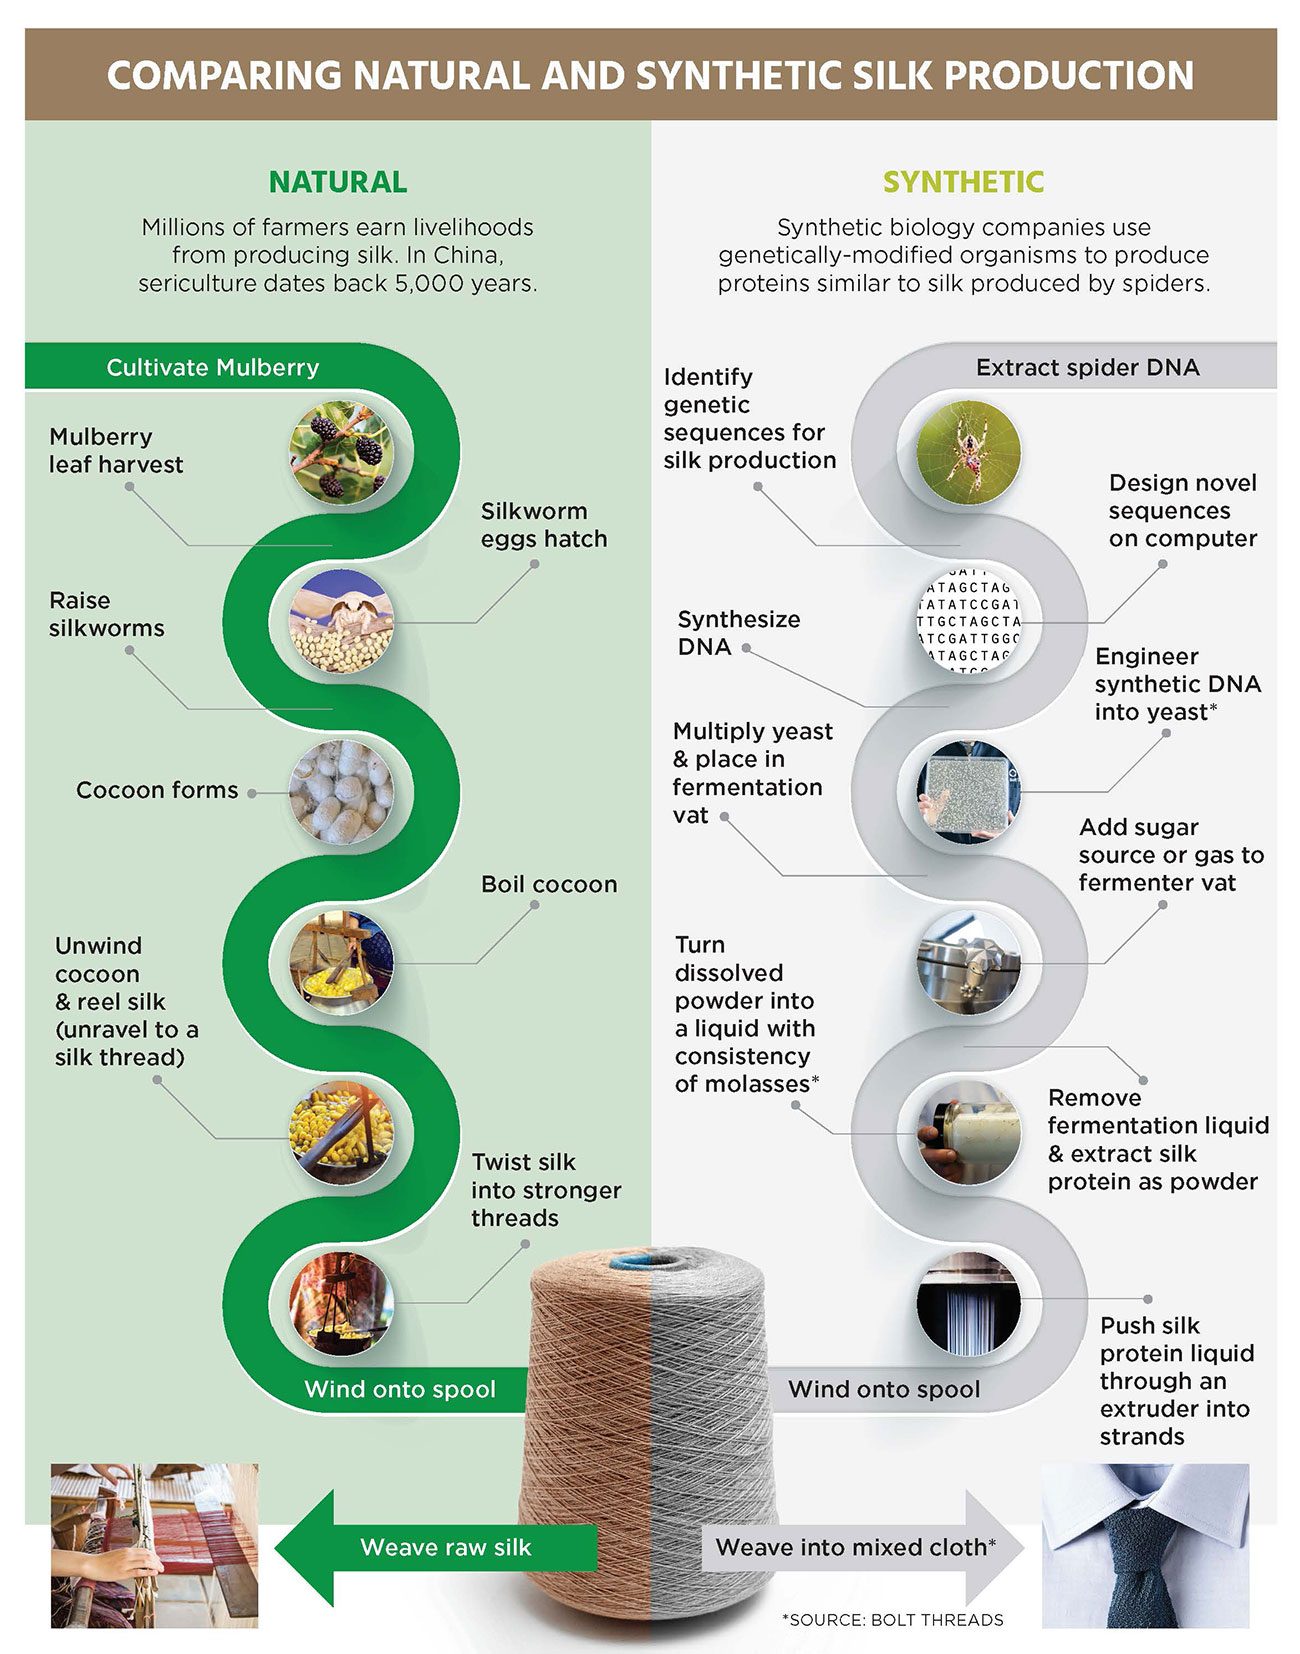 Comparing natural and Synthetic Silk Production, courtesy of ETC Group